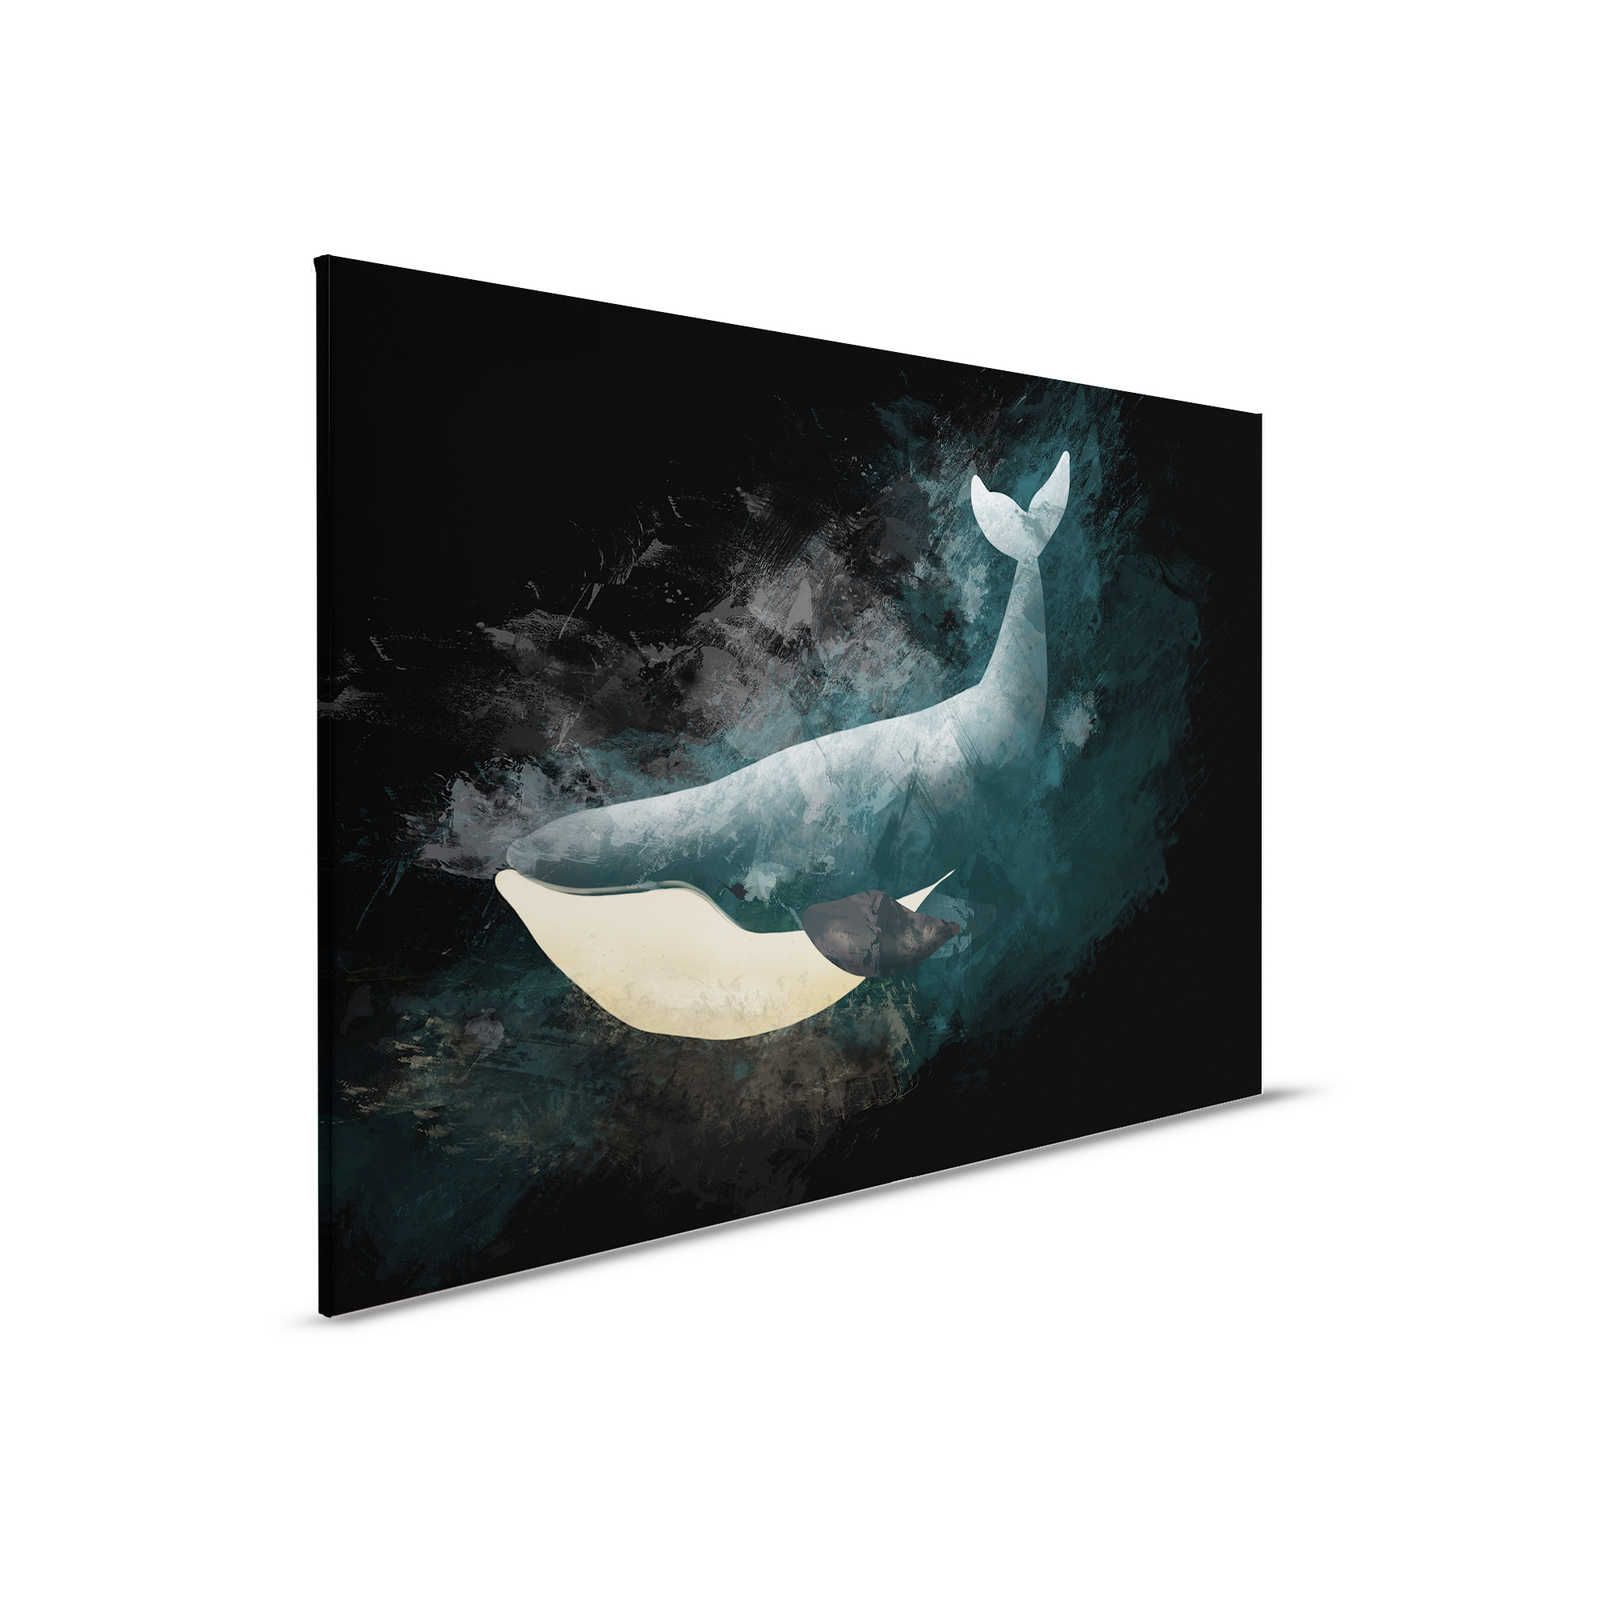 Black Canvas Painting with Whale in Sign Design - 0.90 m x 0.60 m
